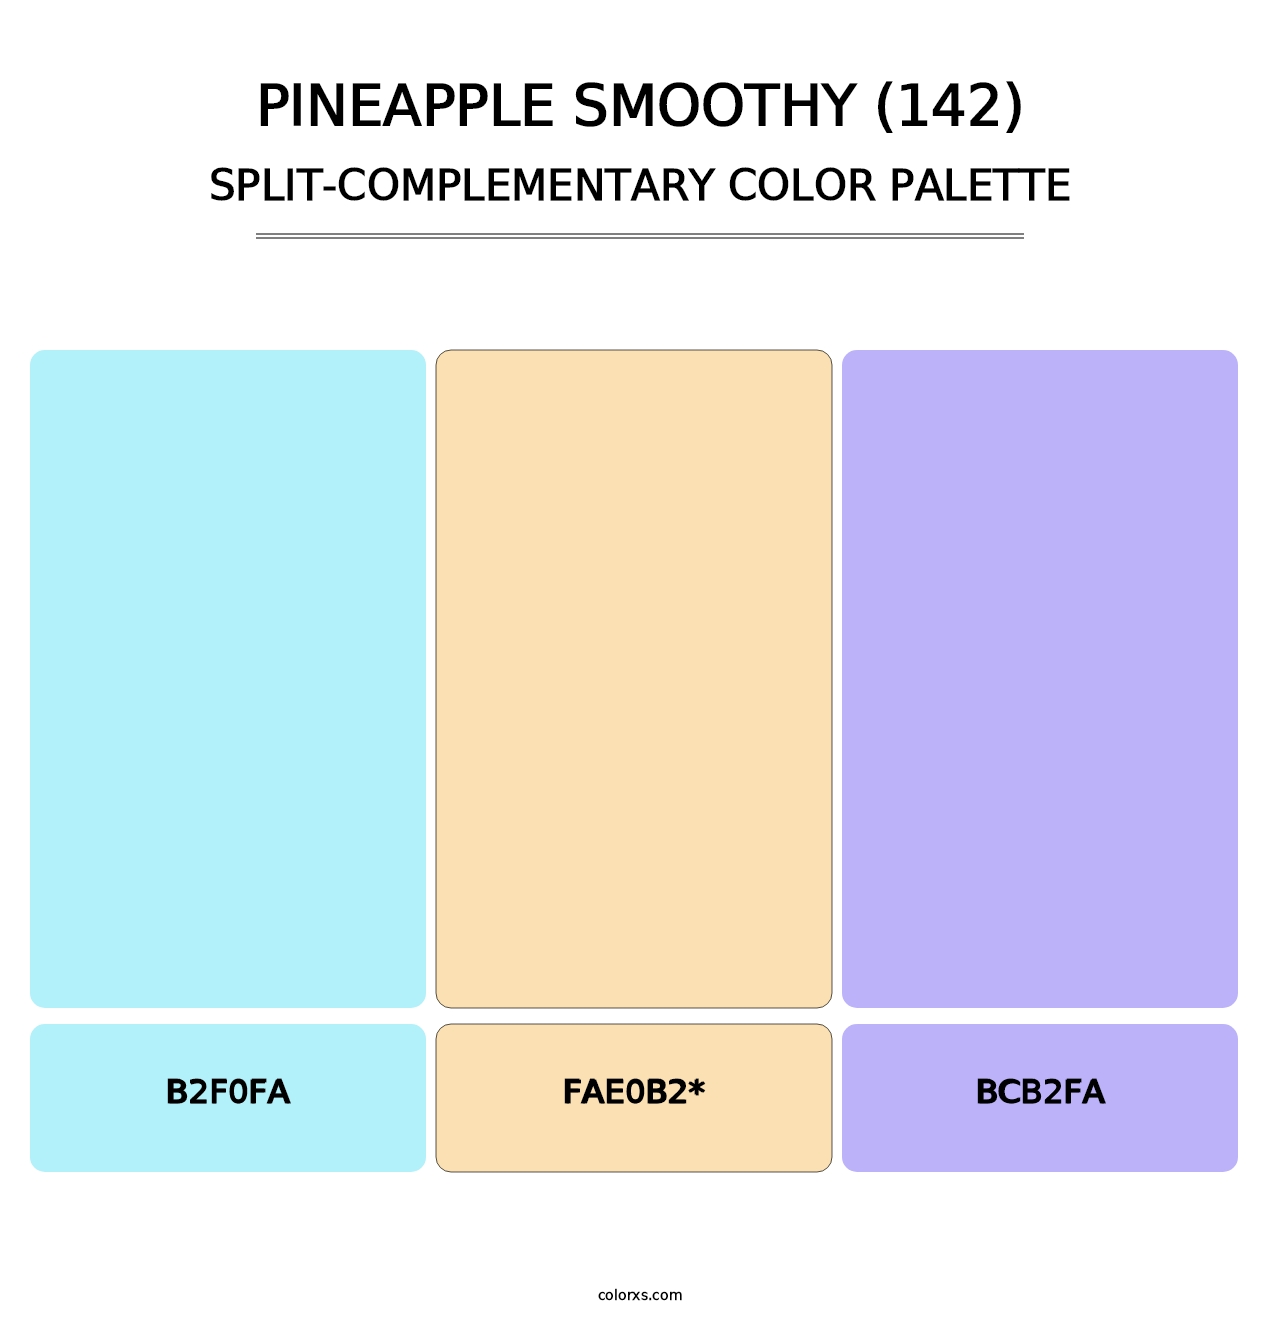 Pineapple Smoothy (142) - Split-Complementary Color Palette